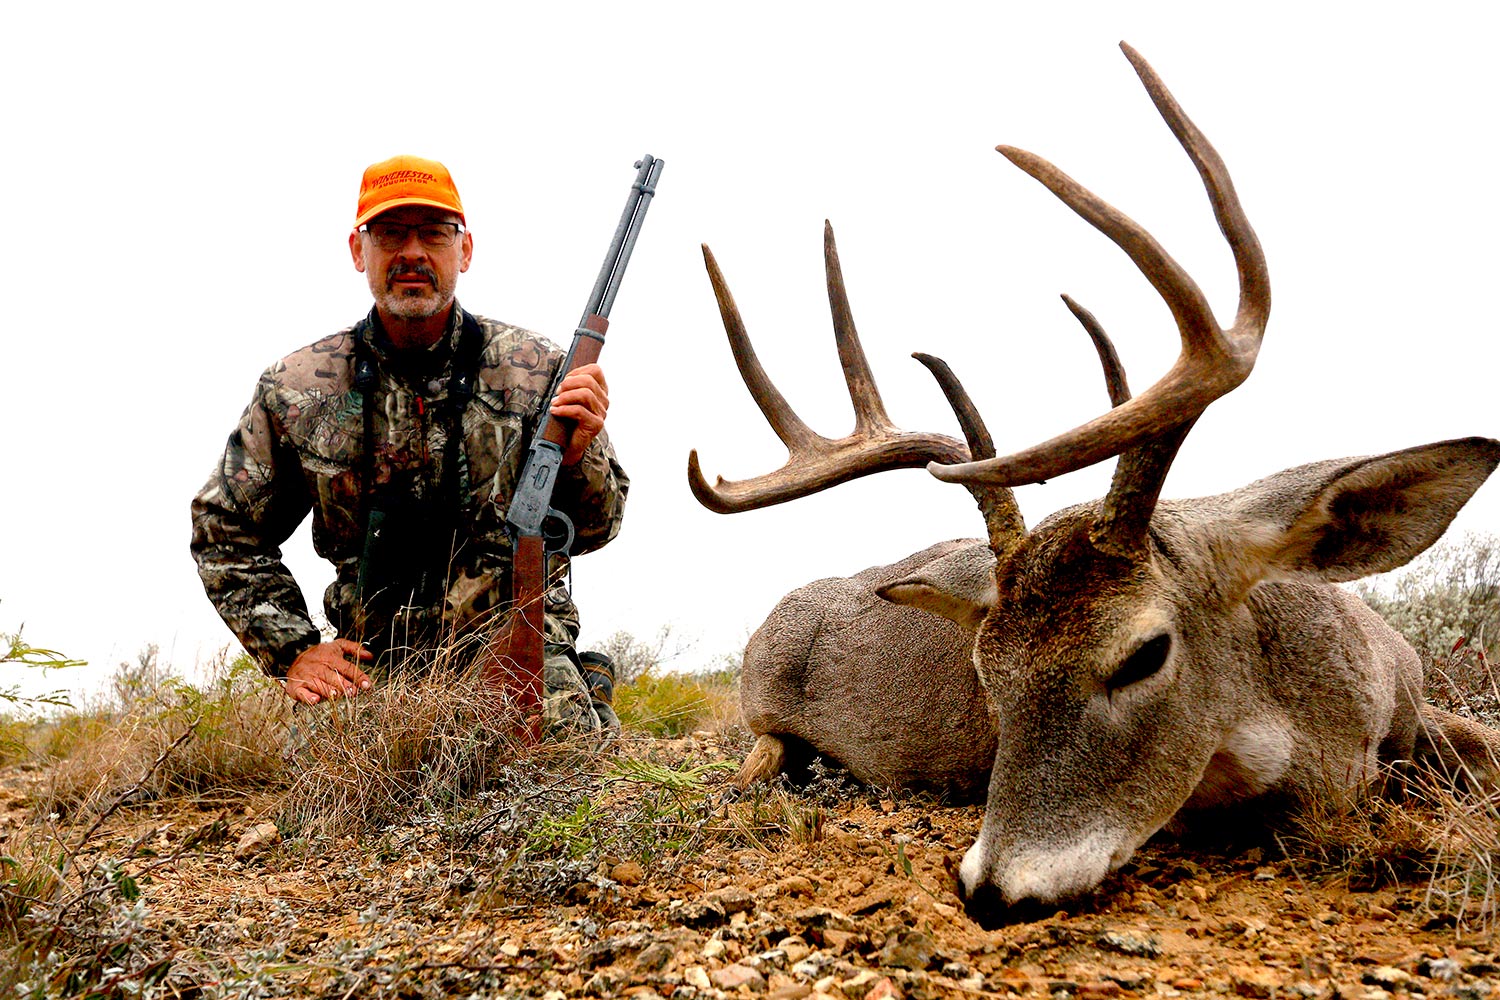 Hunter with a buck and lever-action rifle.